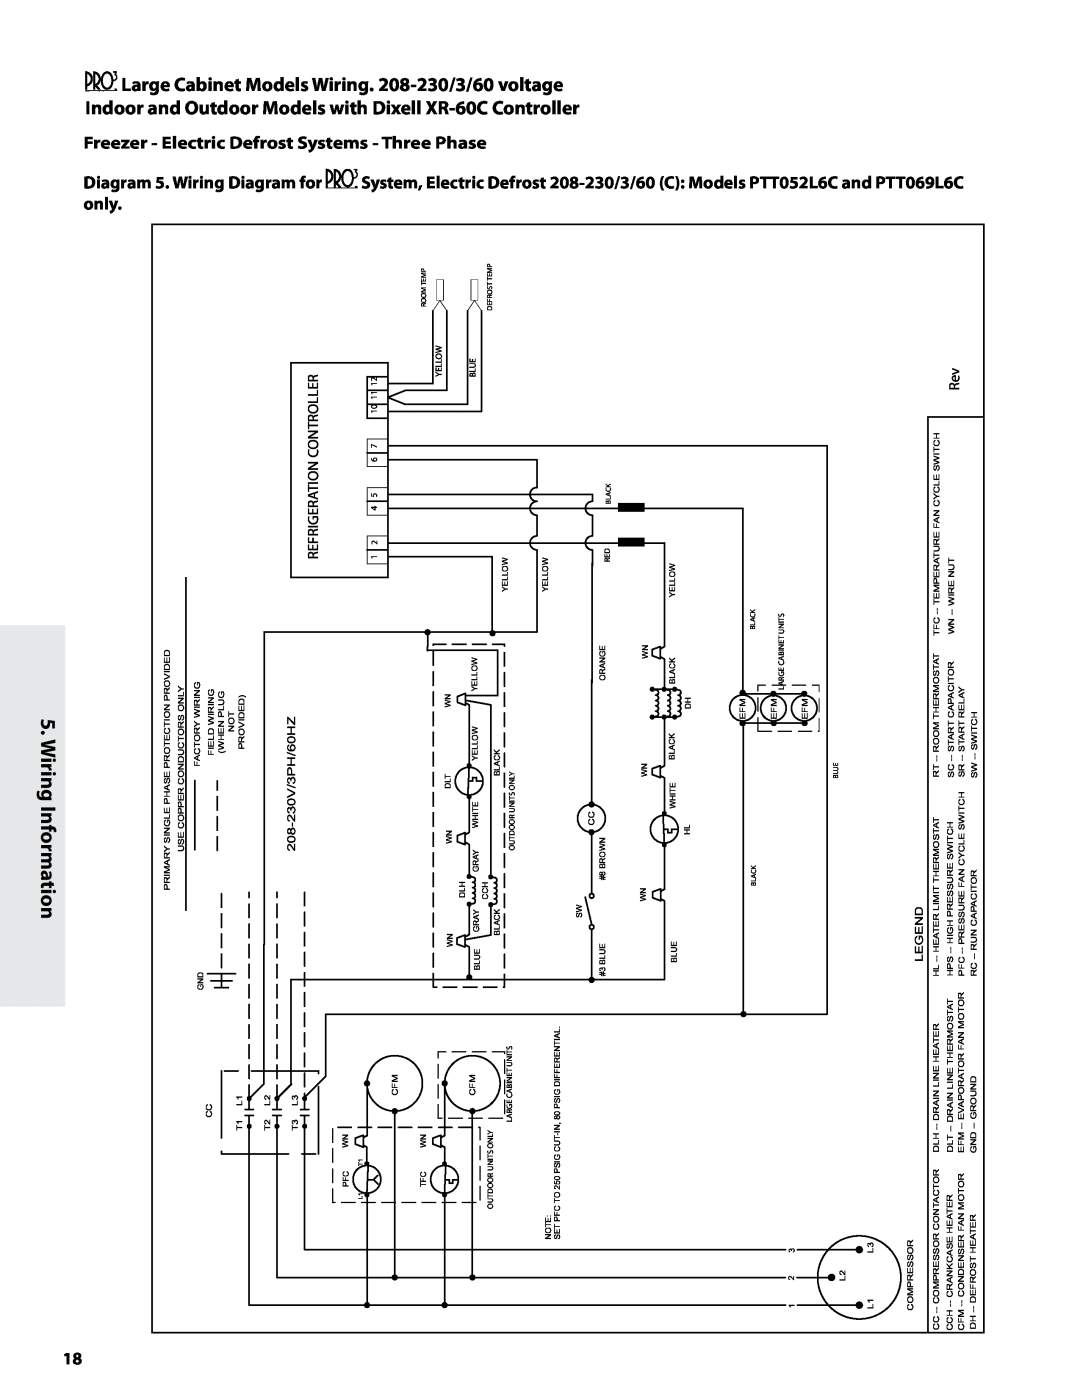 Heatcraft Refrigeration Products H-IM-82B WiriInformation.5g, Diagram 5. Wiring Diagram for only, System, Electric Defrost 